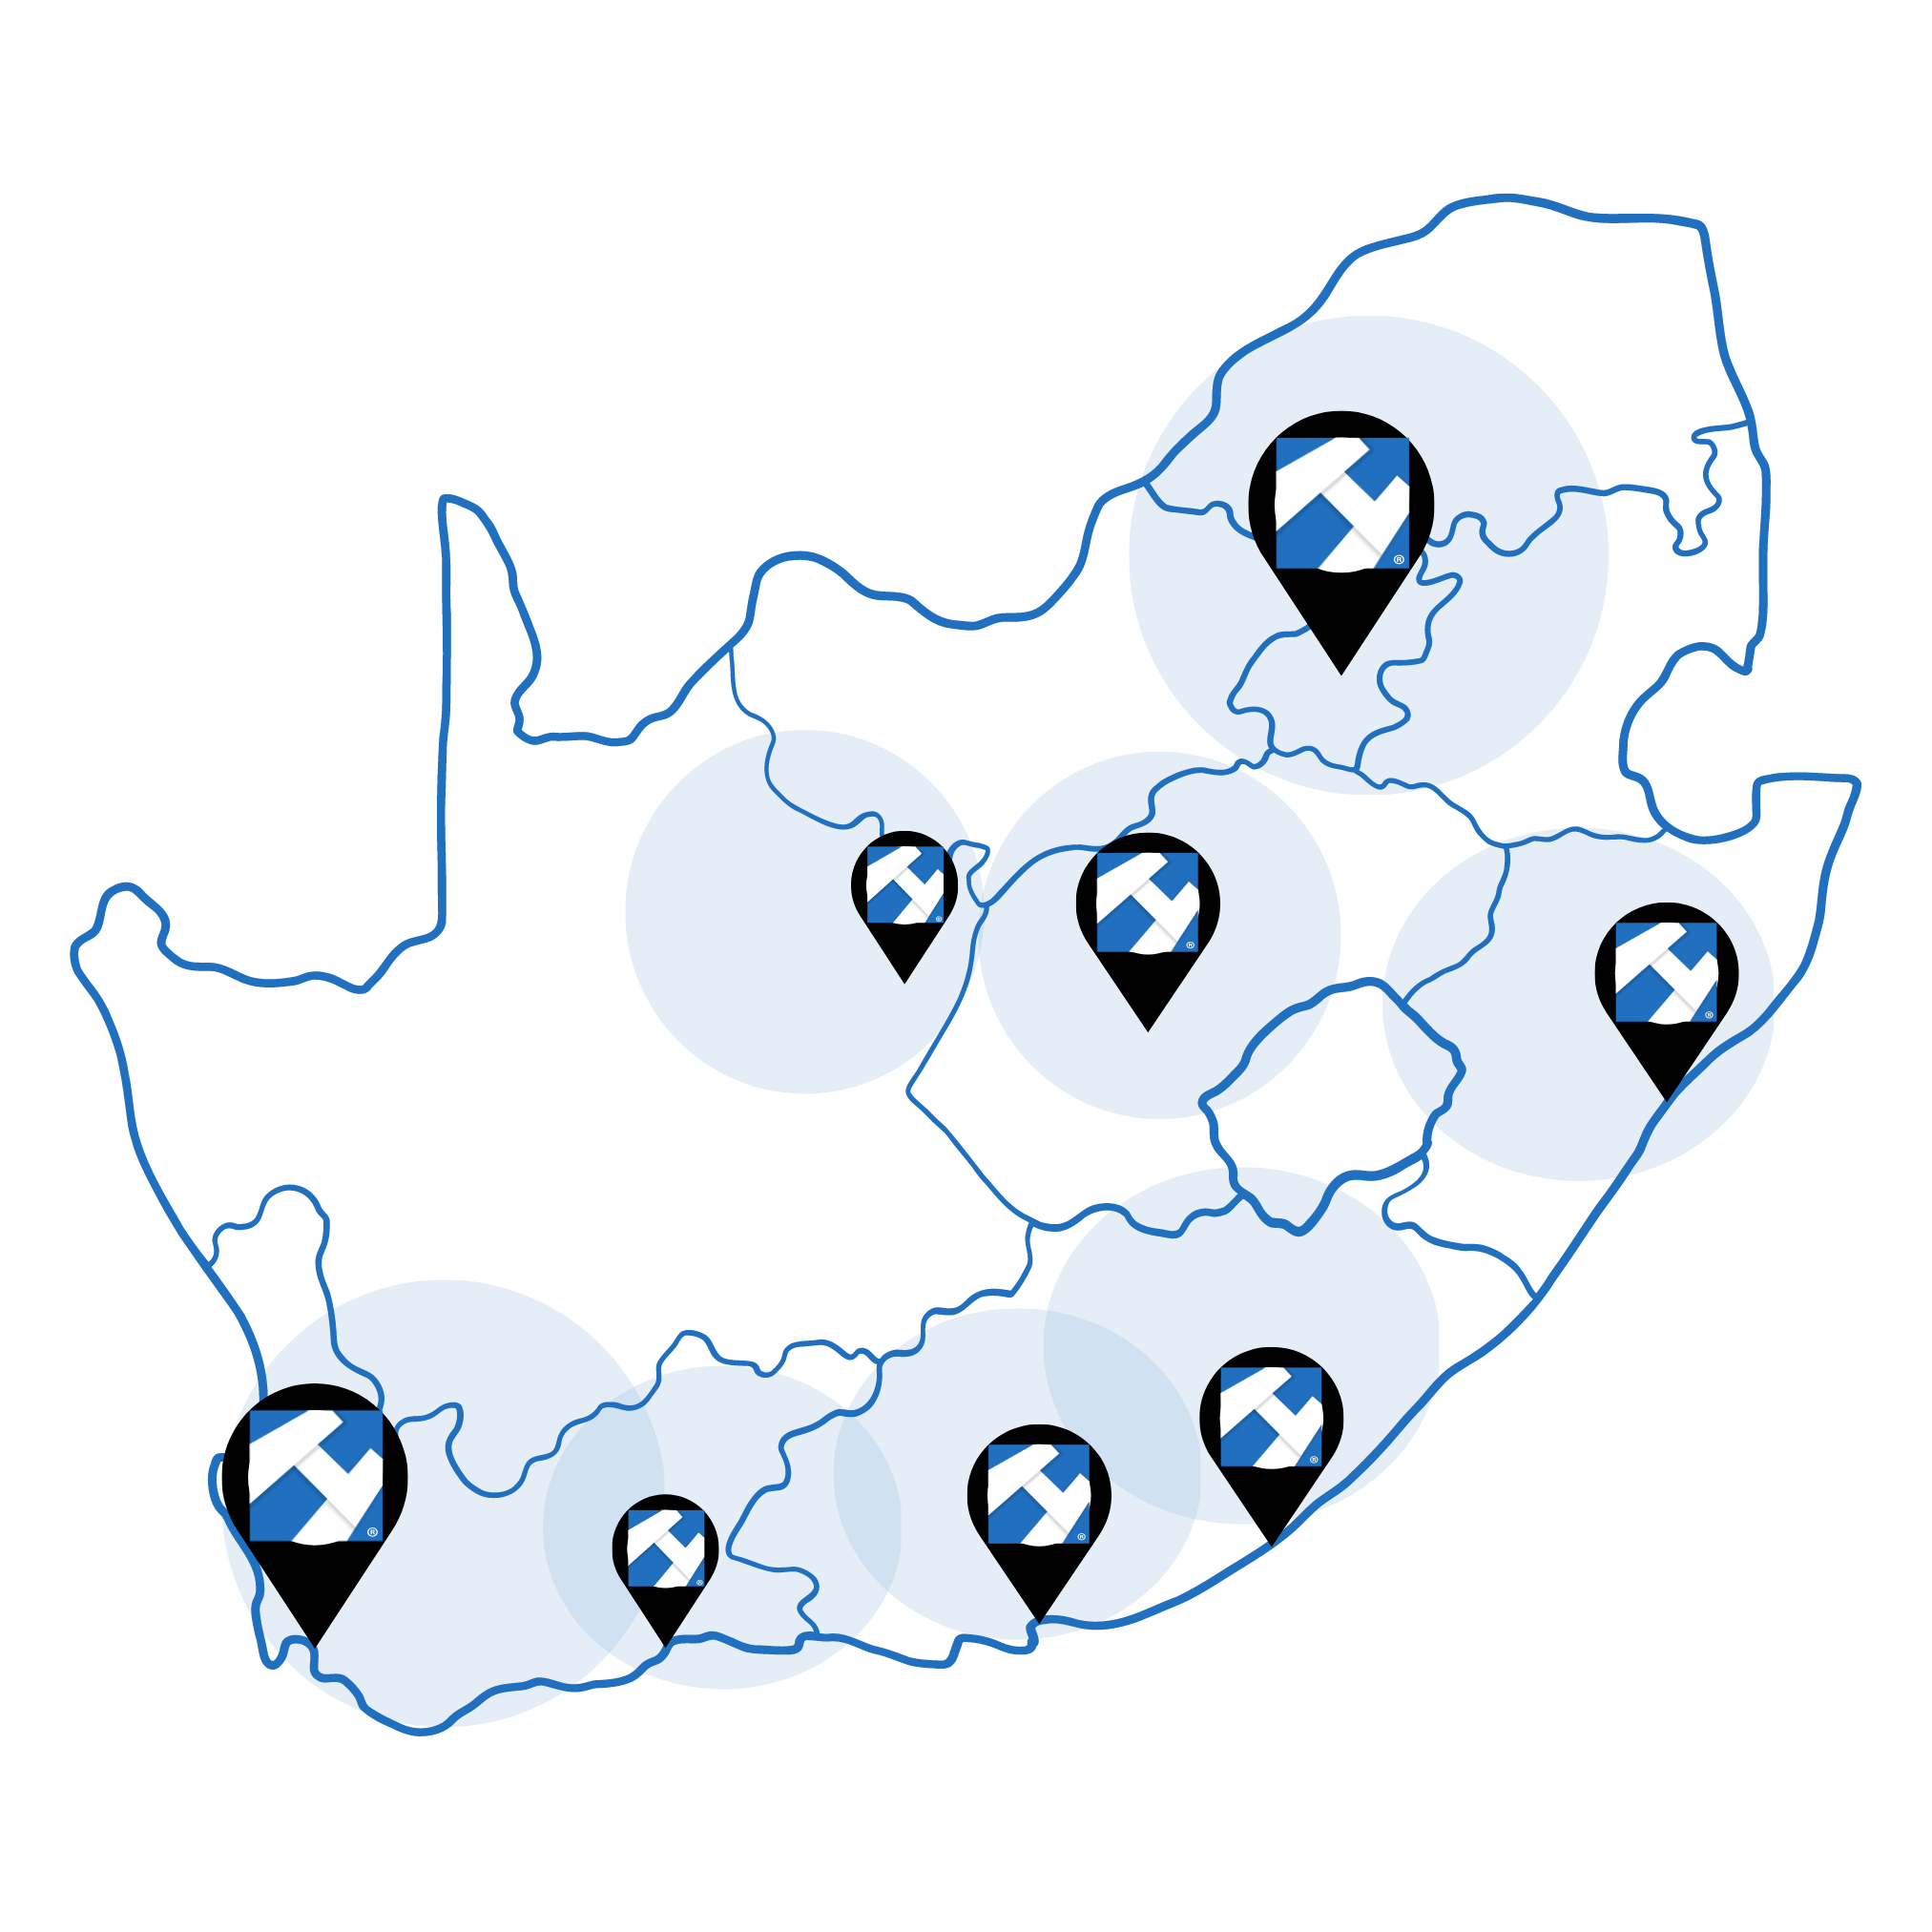 A map of South Africa highlighting the areas where HUGE TNS operate with Gauteng and Cape Town being the largest